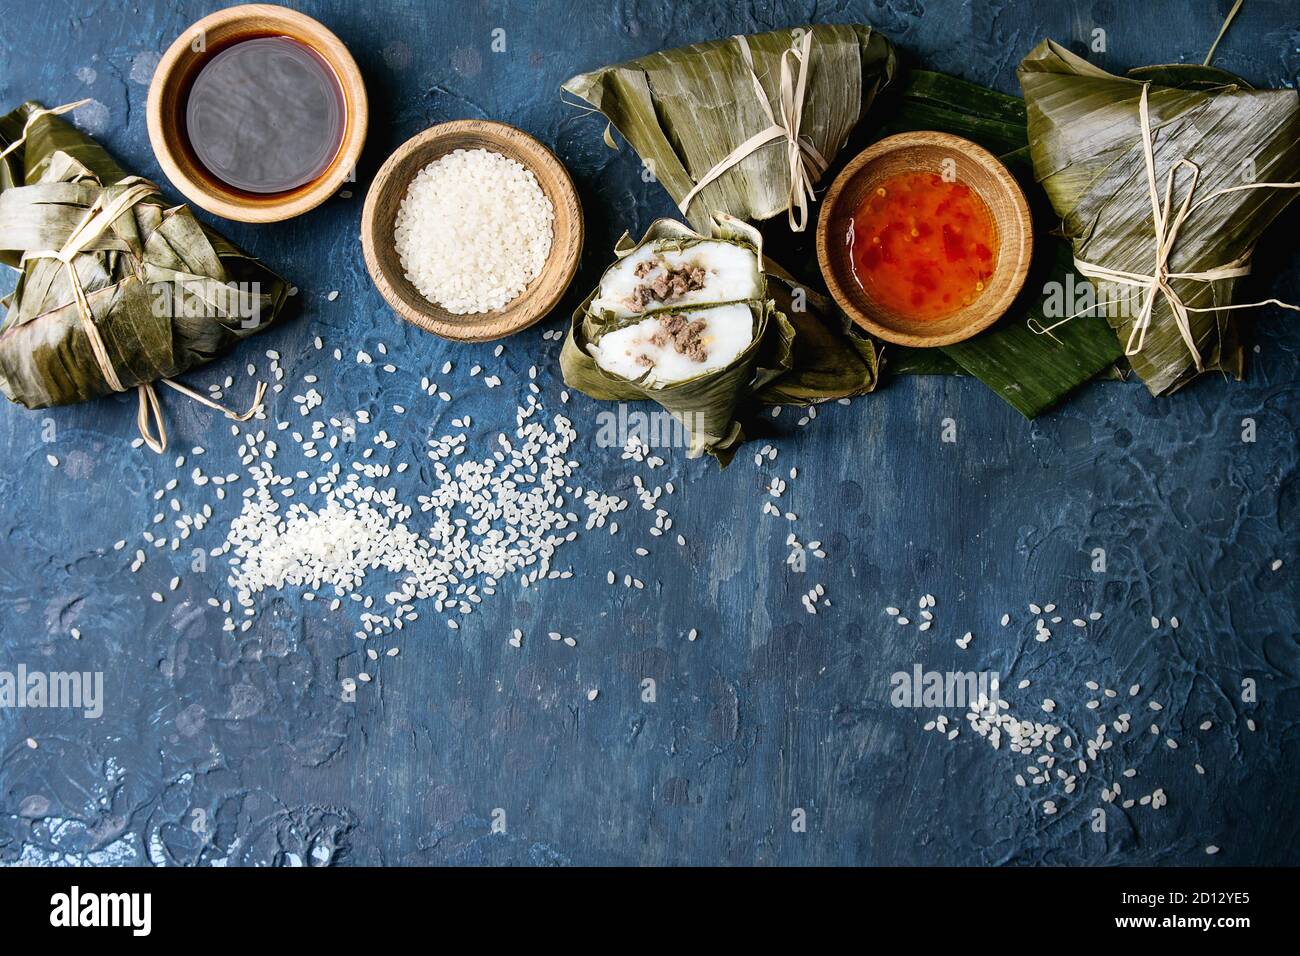 Asian rice piramidal steamed dumplings from rice tapioca flour with meat filling in banana leaves. Ingredients and sauces above over blue texture back Stock Photo